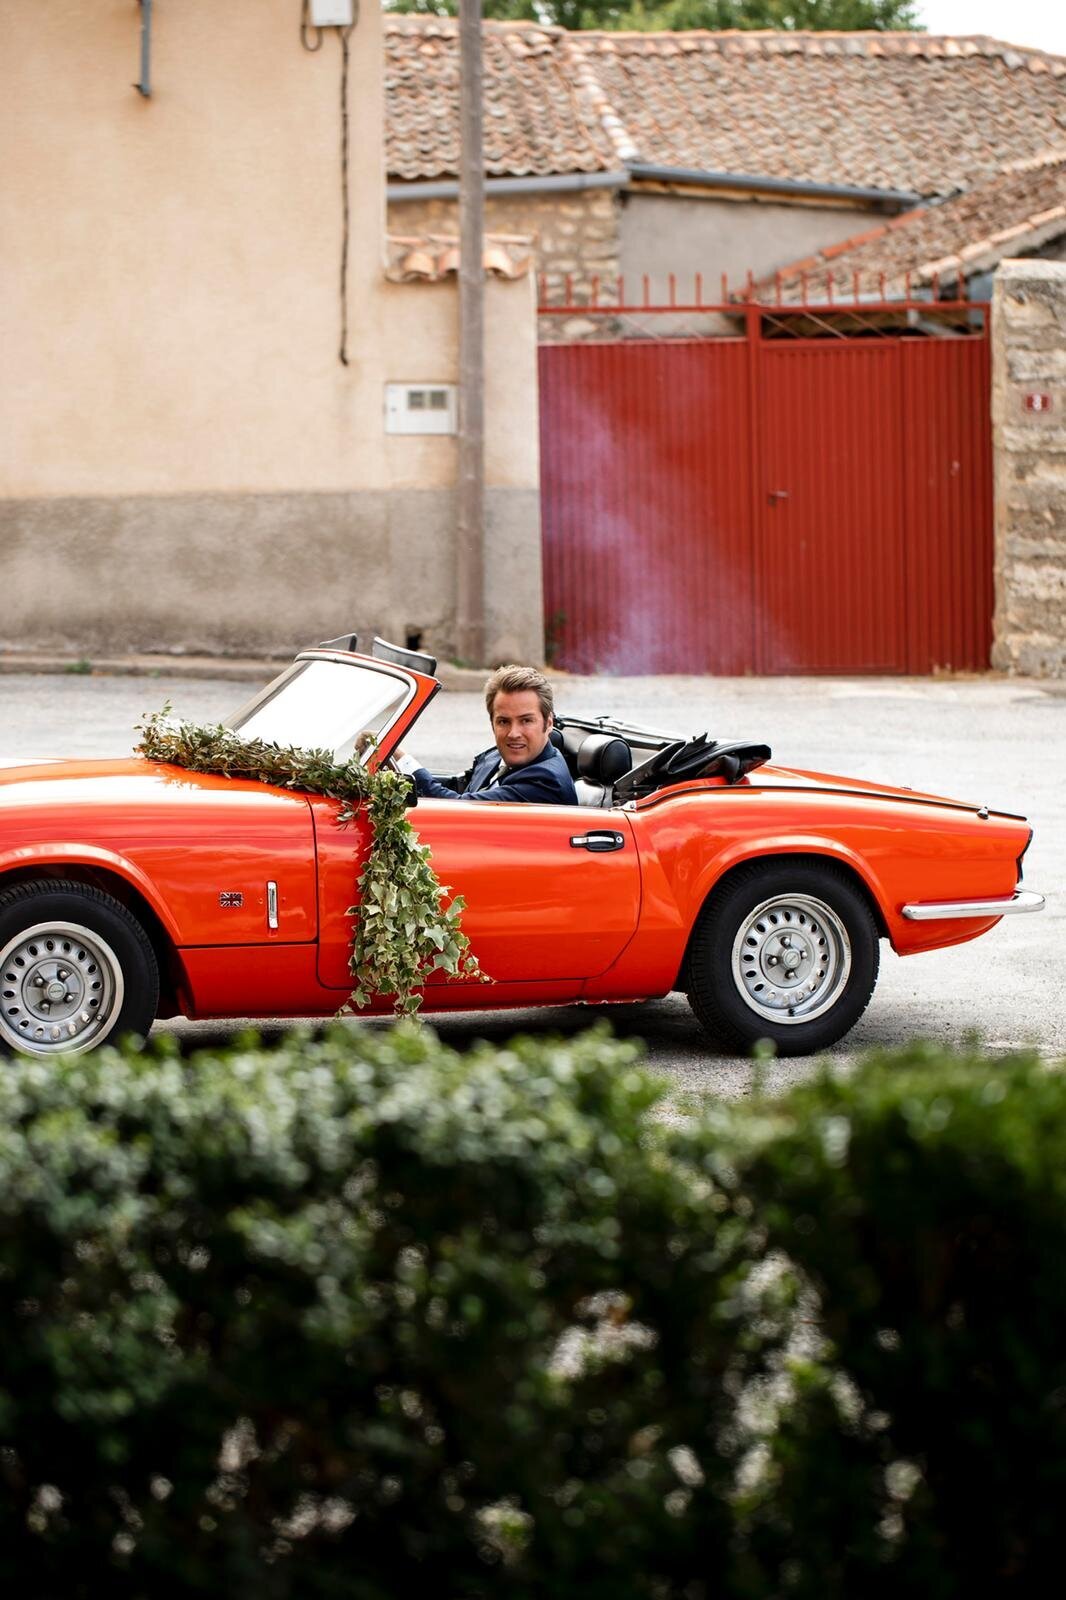 The groom coming to the church with a red classic car